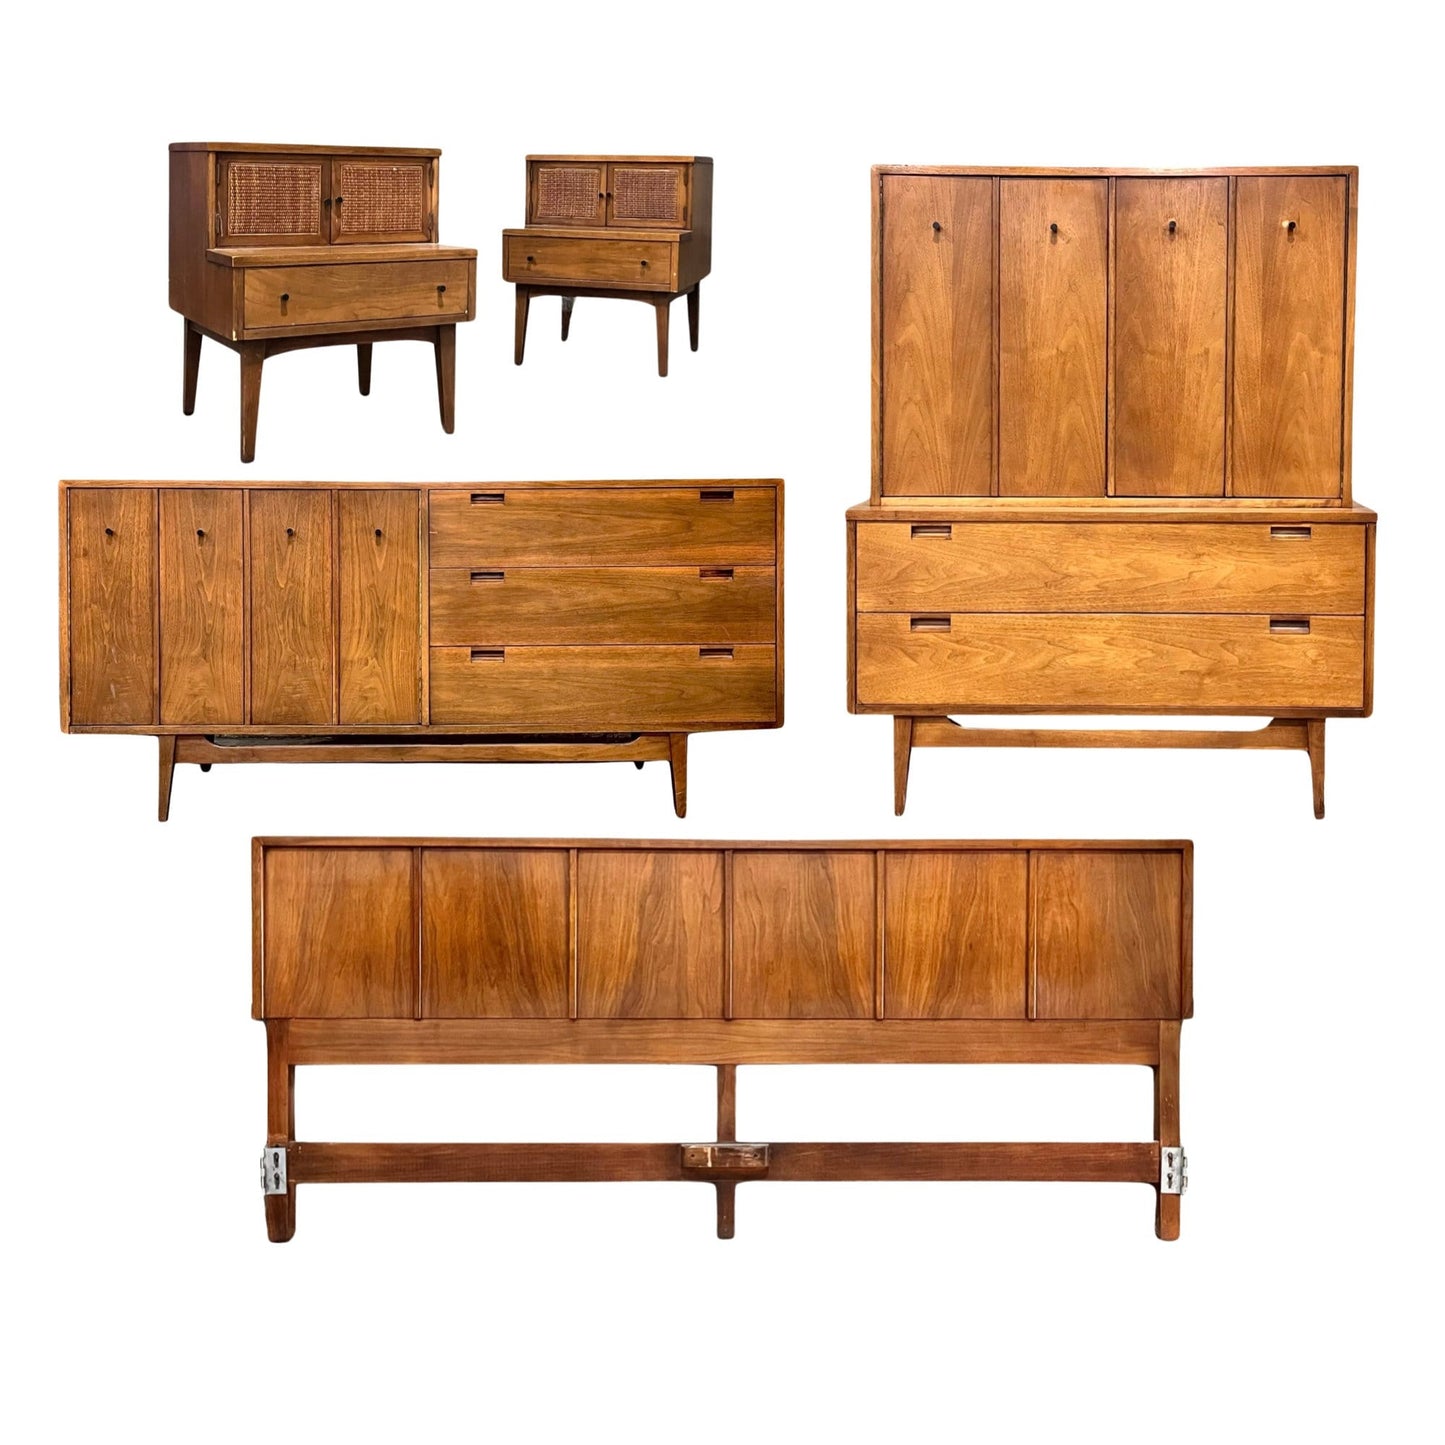 Complete 1960s bedroom set by American of Martinsville with elegant walnut wood.